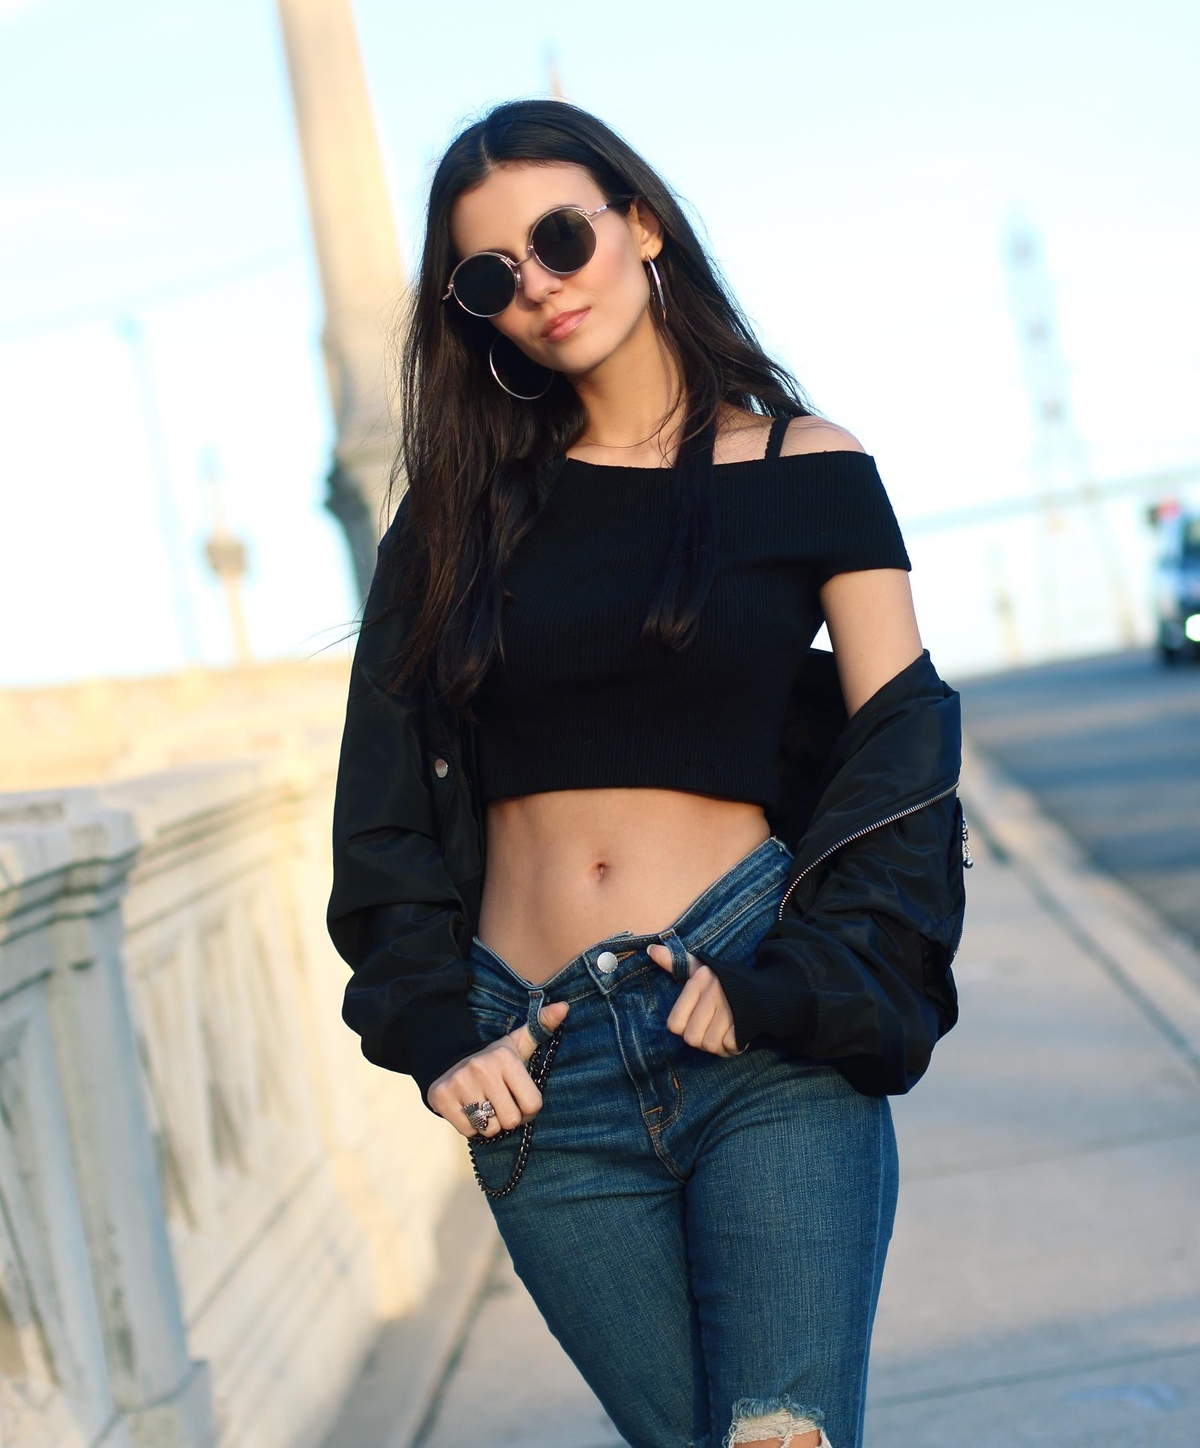 People 1200x1448 Victoria Justice women singer actress brunette belly jeans urban torn jeans Latinas women with shades crop top bare midriff bare shoulders